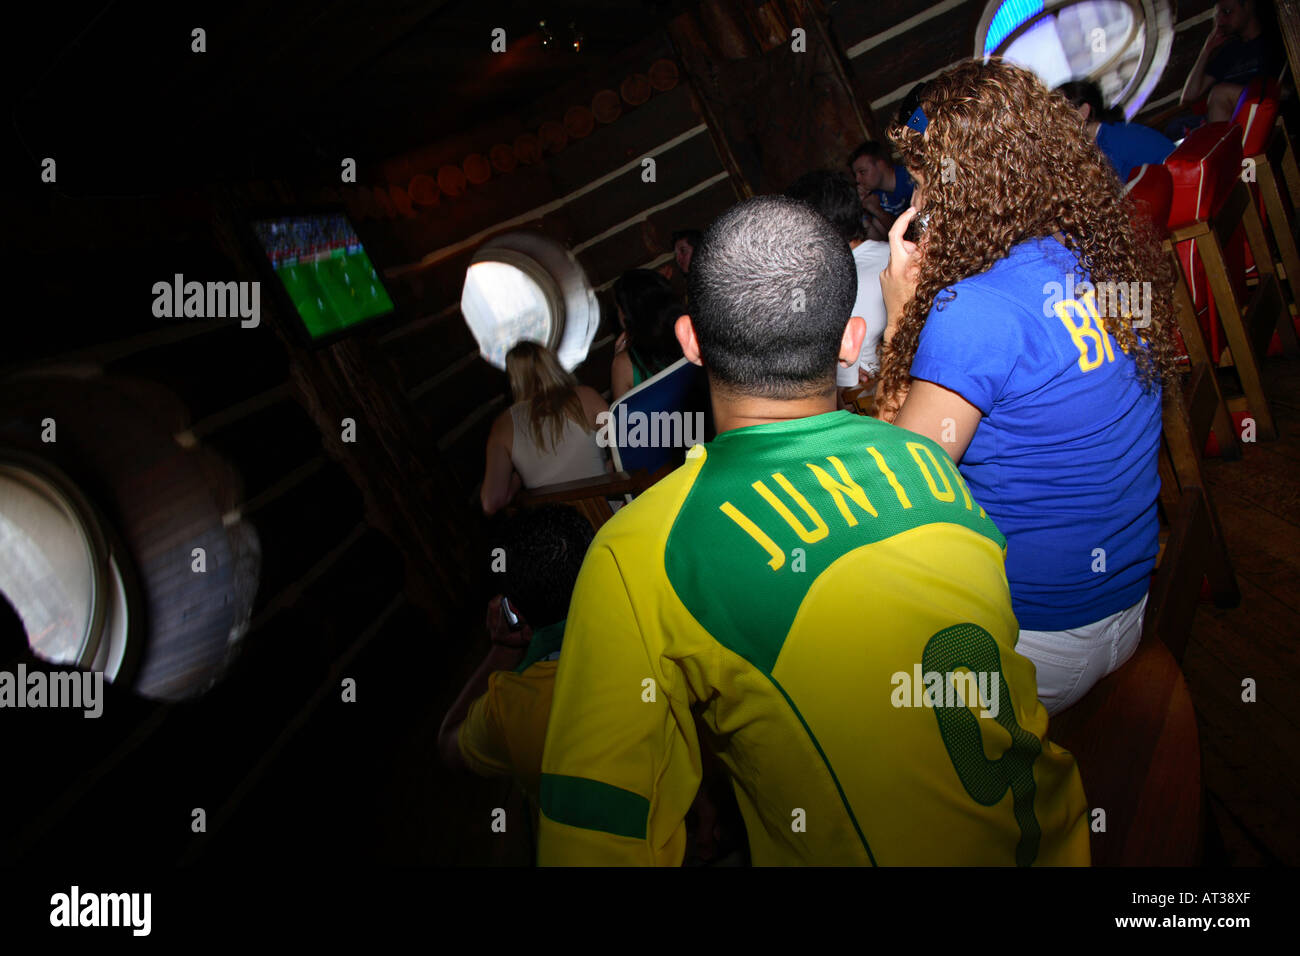 Brasilian fans cheering on their team in 2006 World Cup quarter-final vs France, On Anon Bar, London Stock Photo